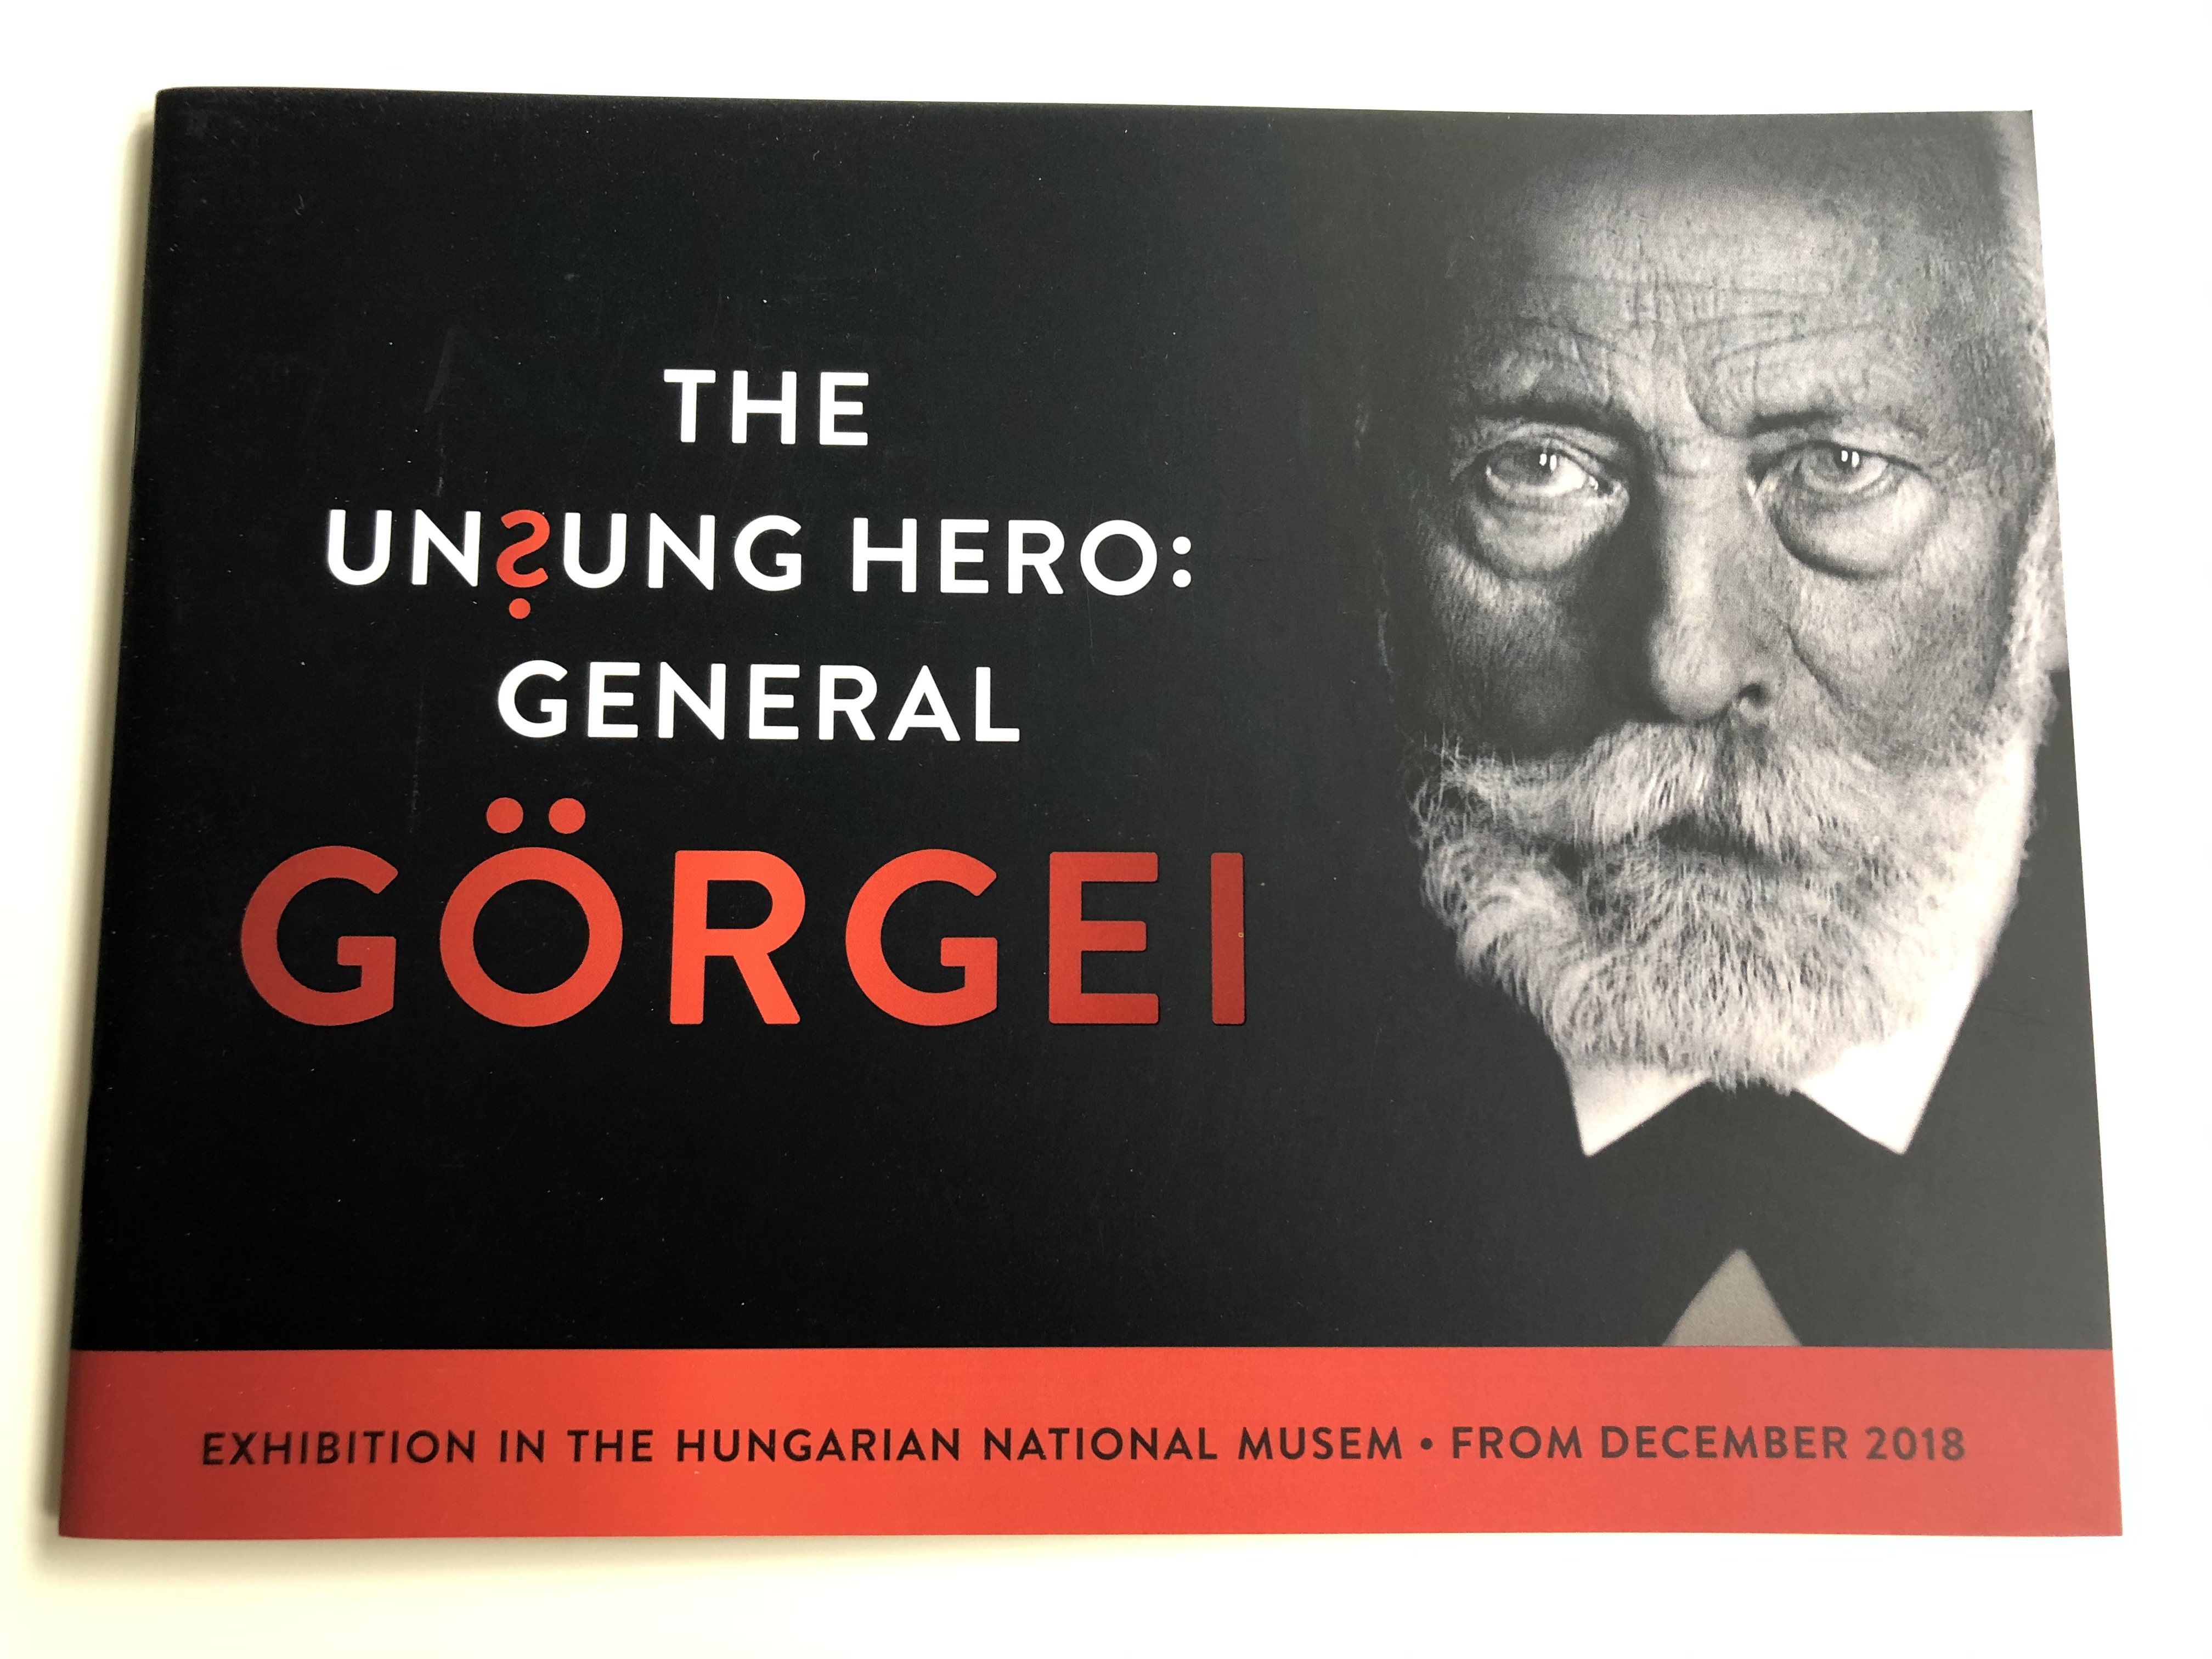 the-unsung-hero-general-g-rgei-exhibition-in-the-hungarian-national-museum-from-december-2018-1.jpg